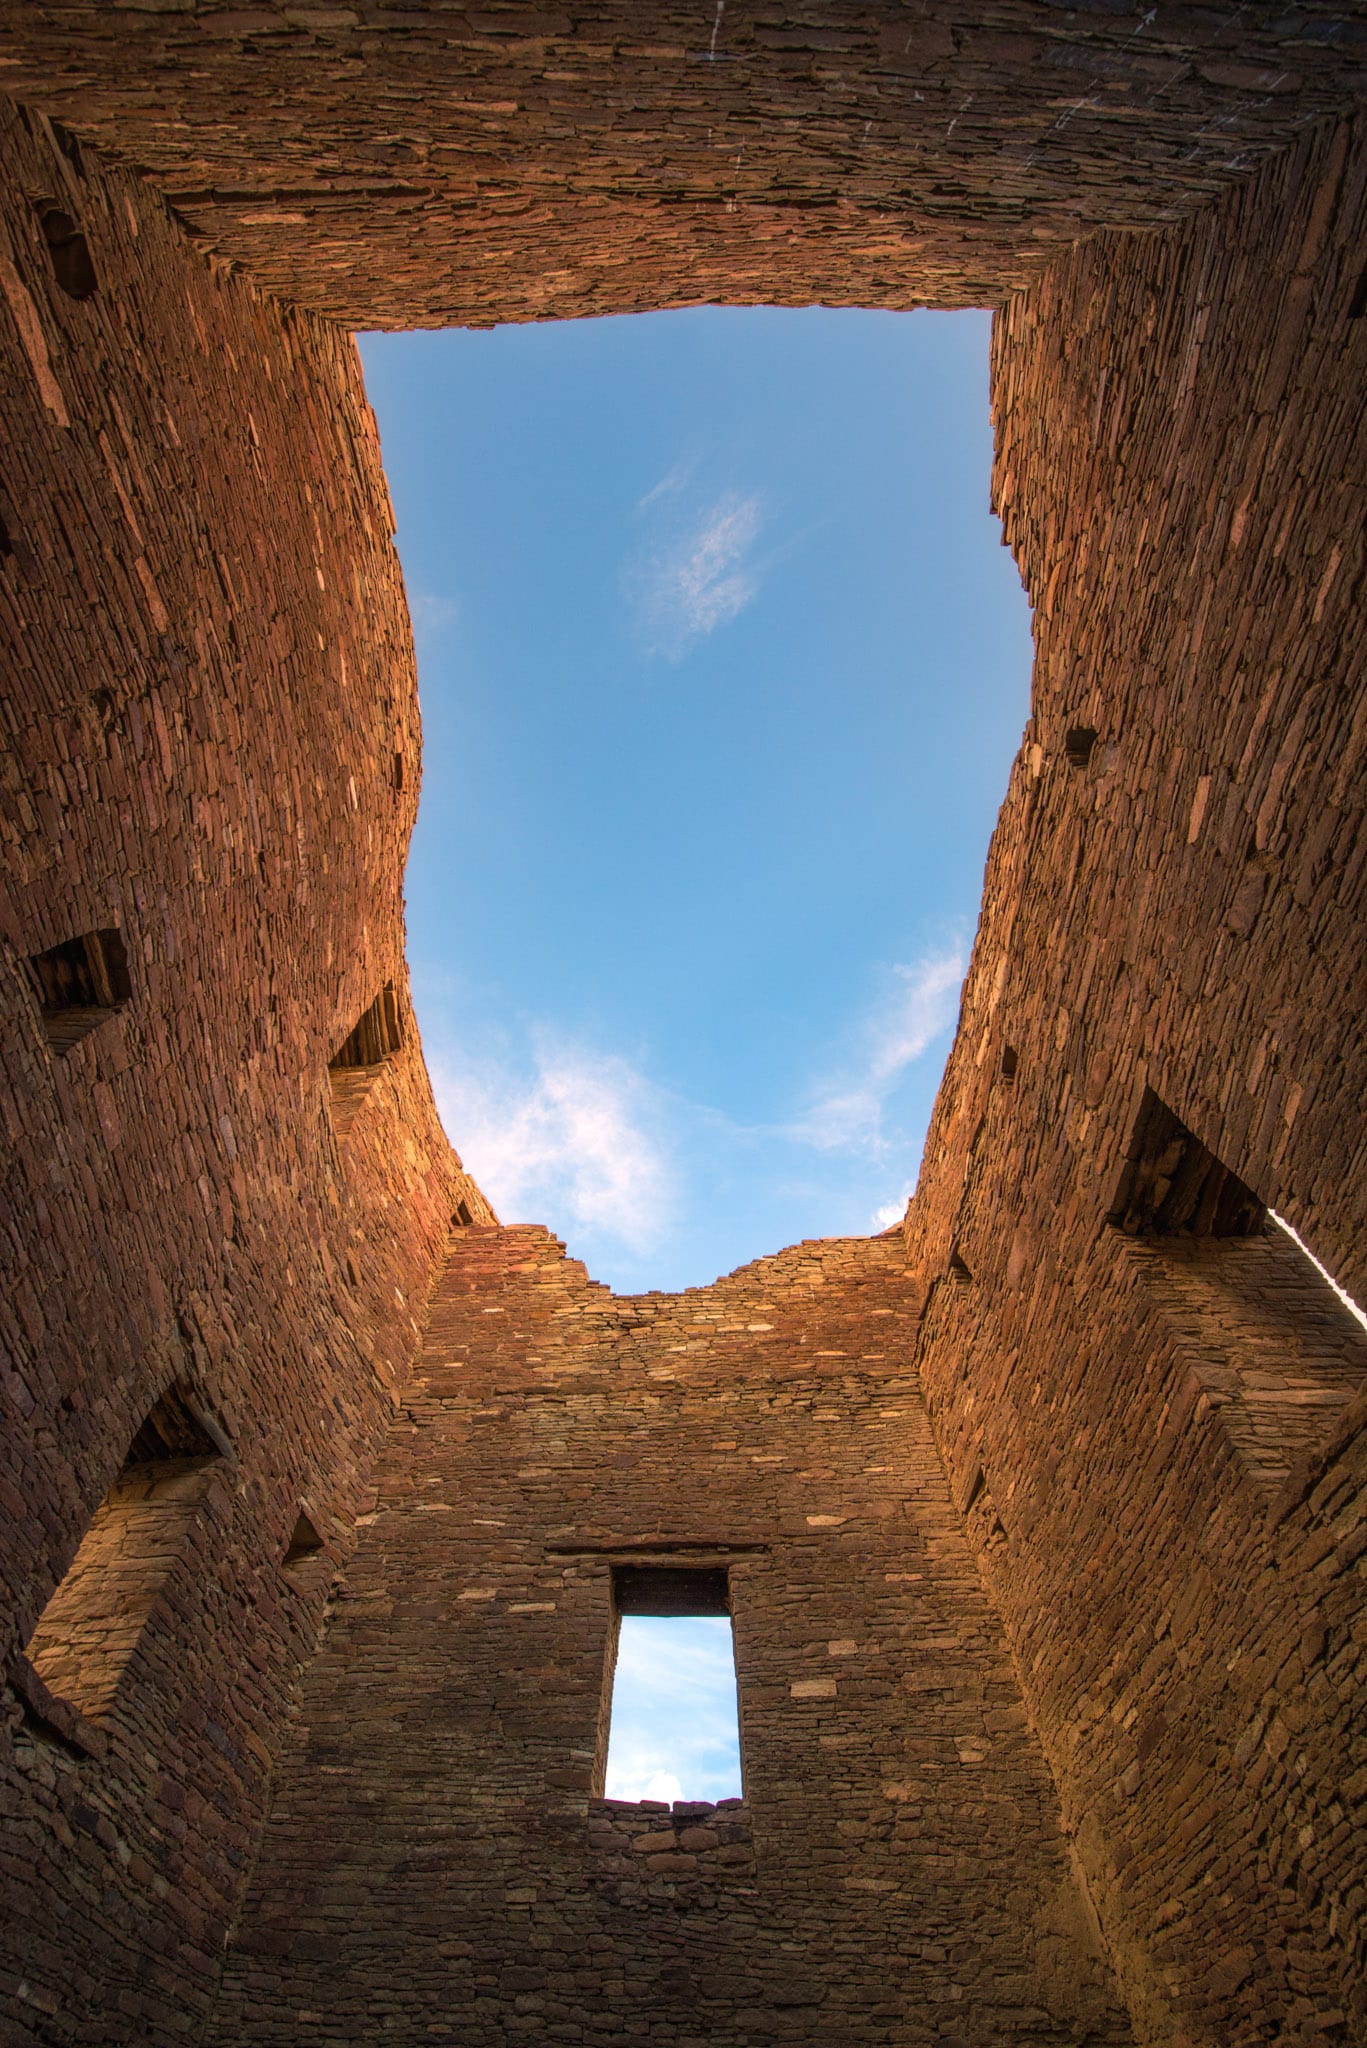 This is a view looking up through a multi-story tower in Pueblo Bonito in Chaco Canyon, New Mexico.